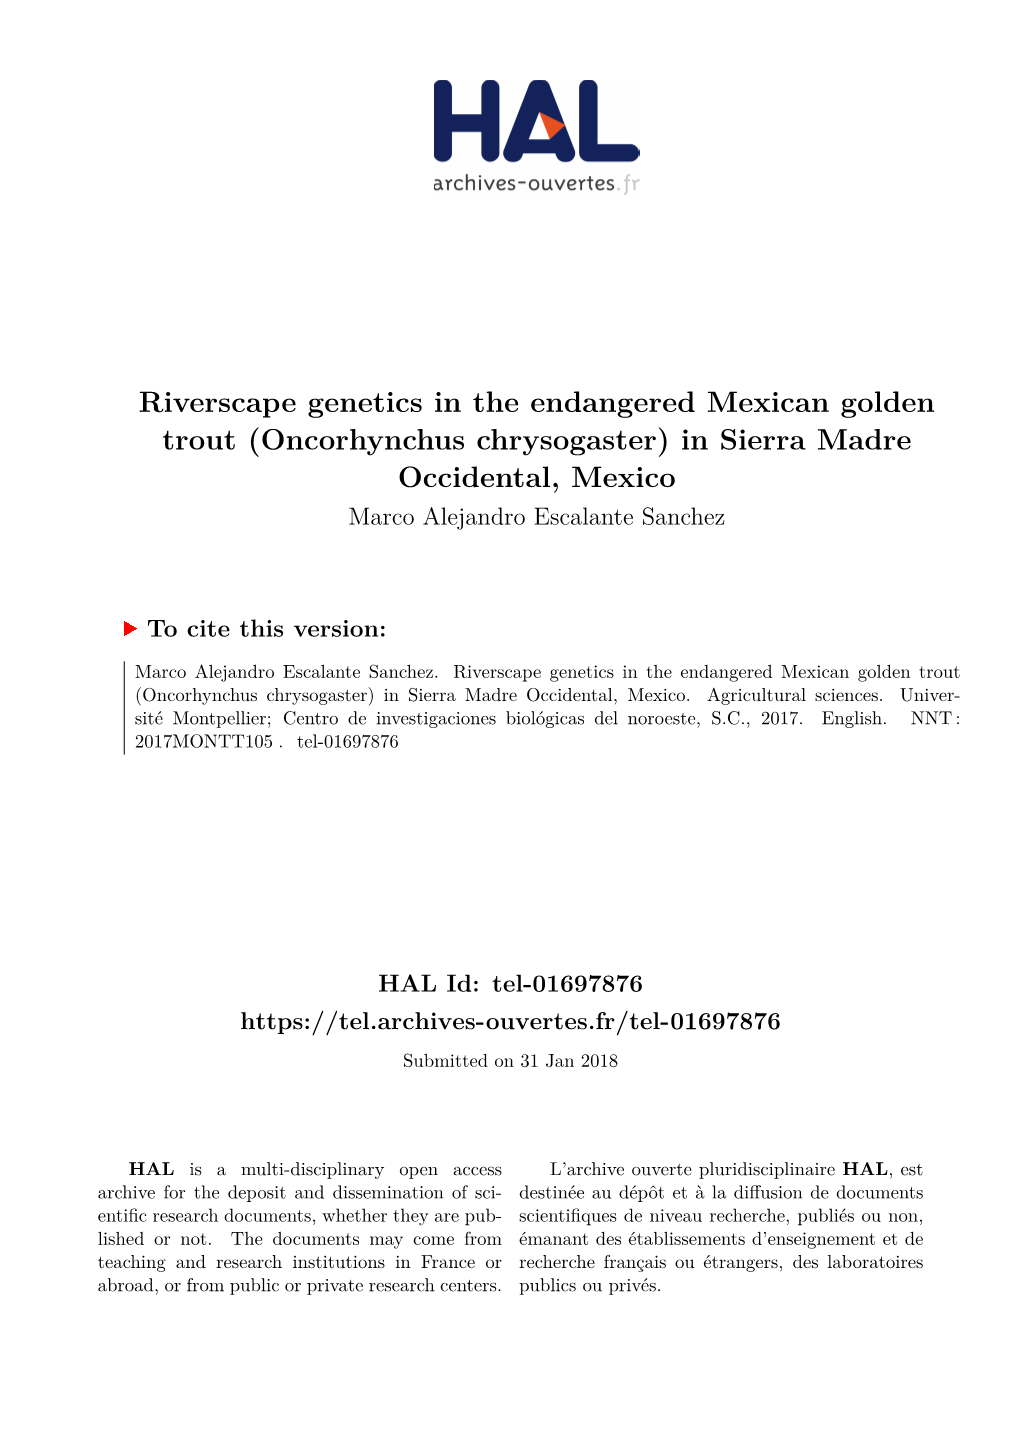 Riverscape Genetics in the Endangered Mexican Golden Trout (Oncorhynchus Chrysogaster) in Sierra Madre Occidental, Mexico Marco Alejandro Escalante Sanchez